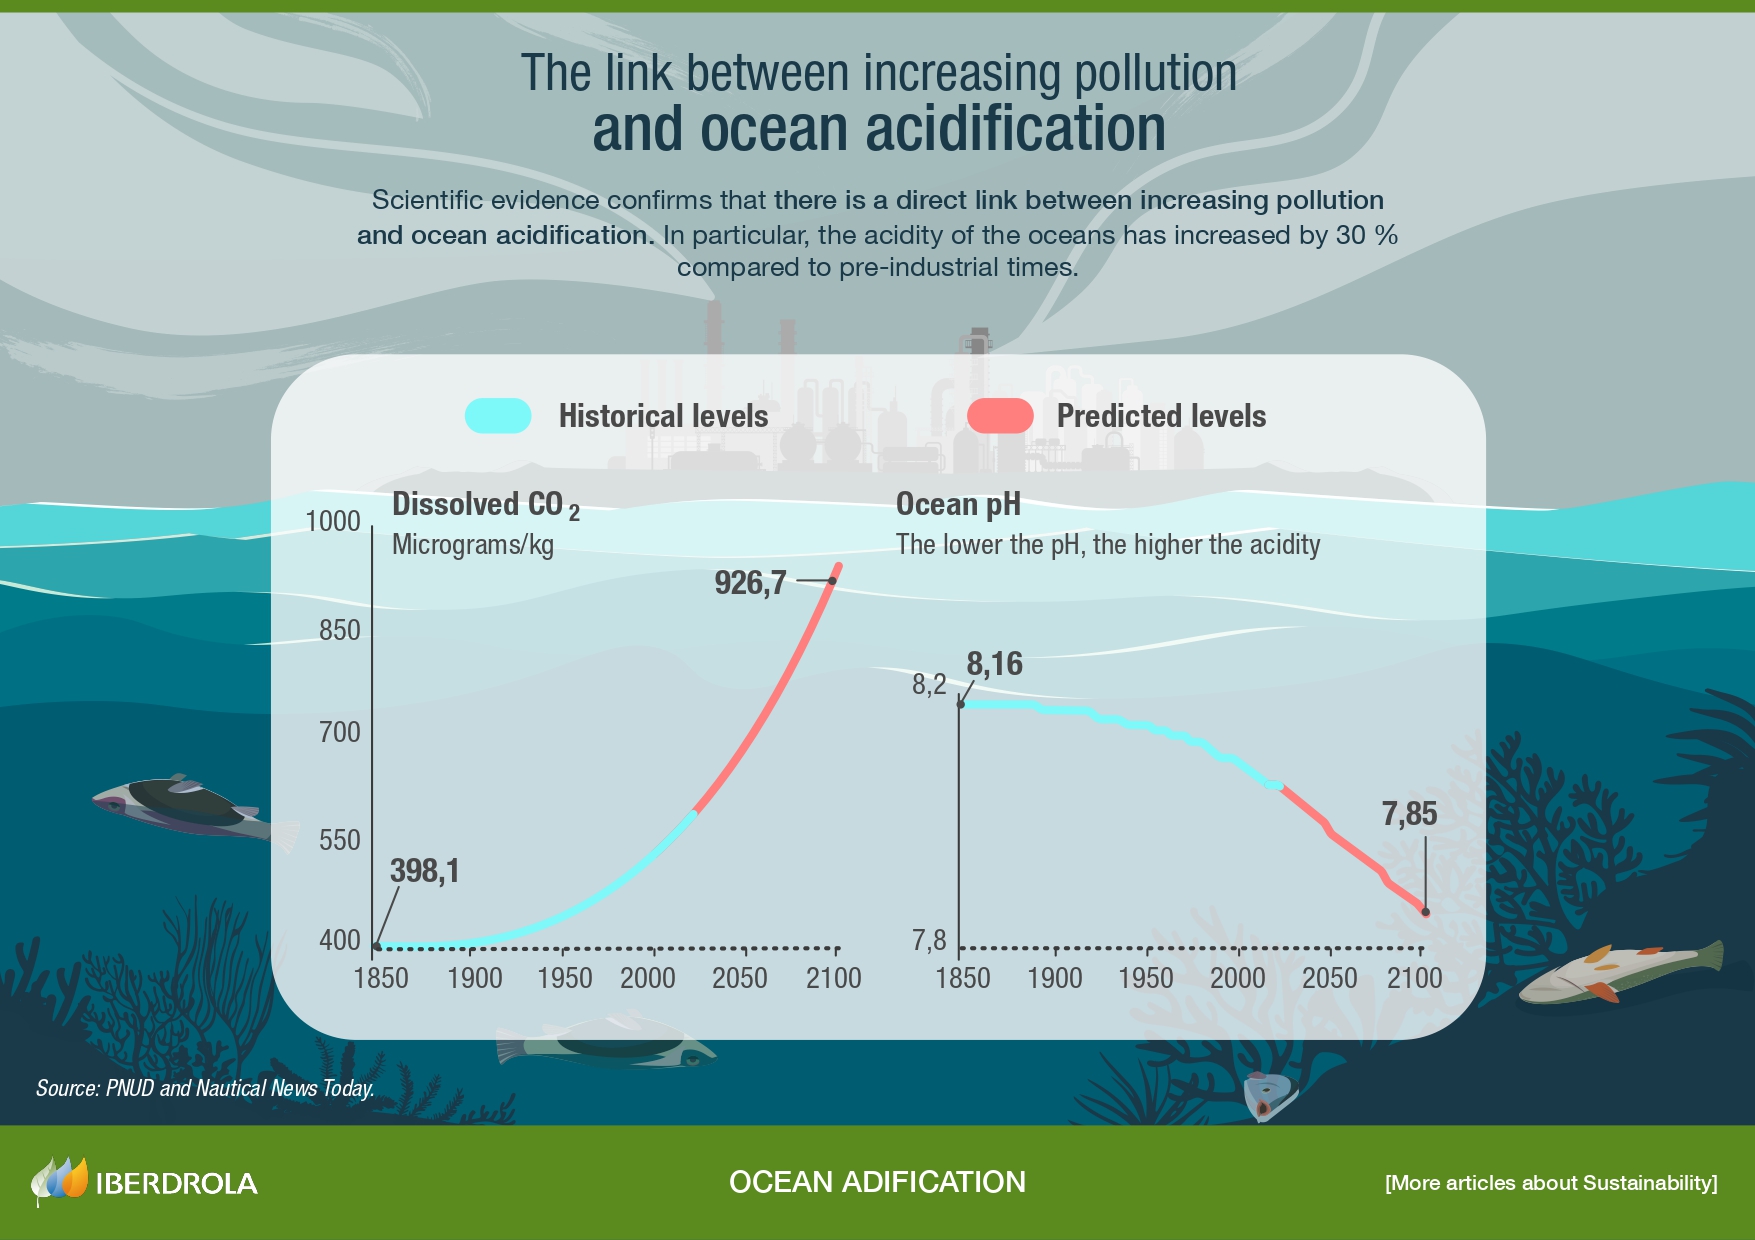 The link between increasing pollution and ocean acidification